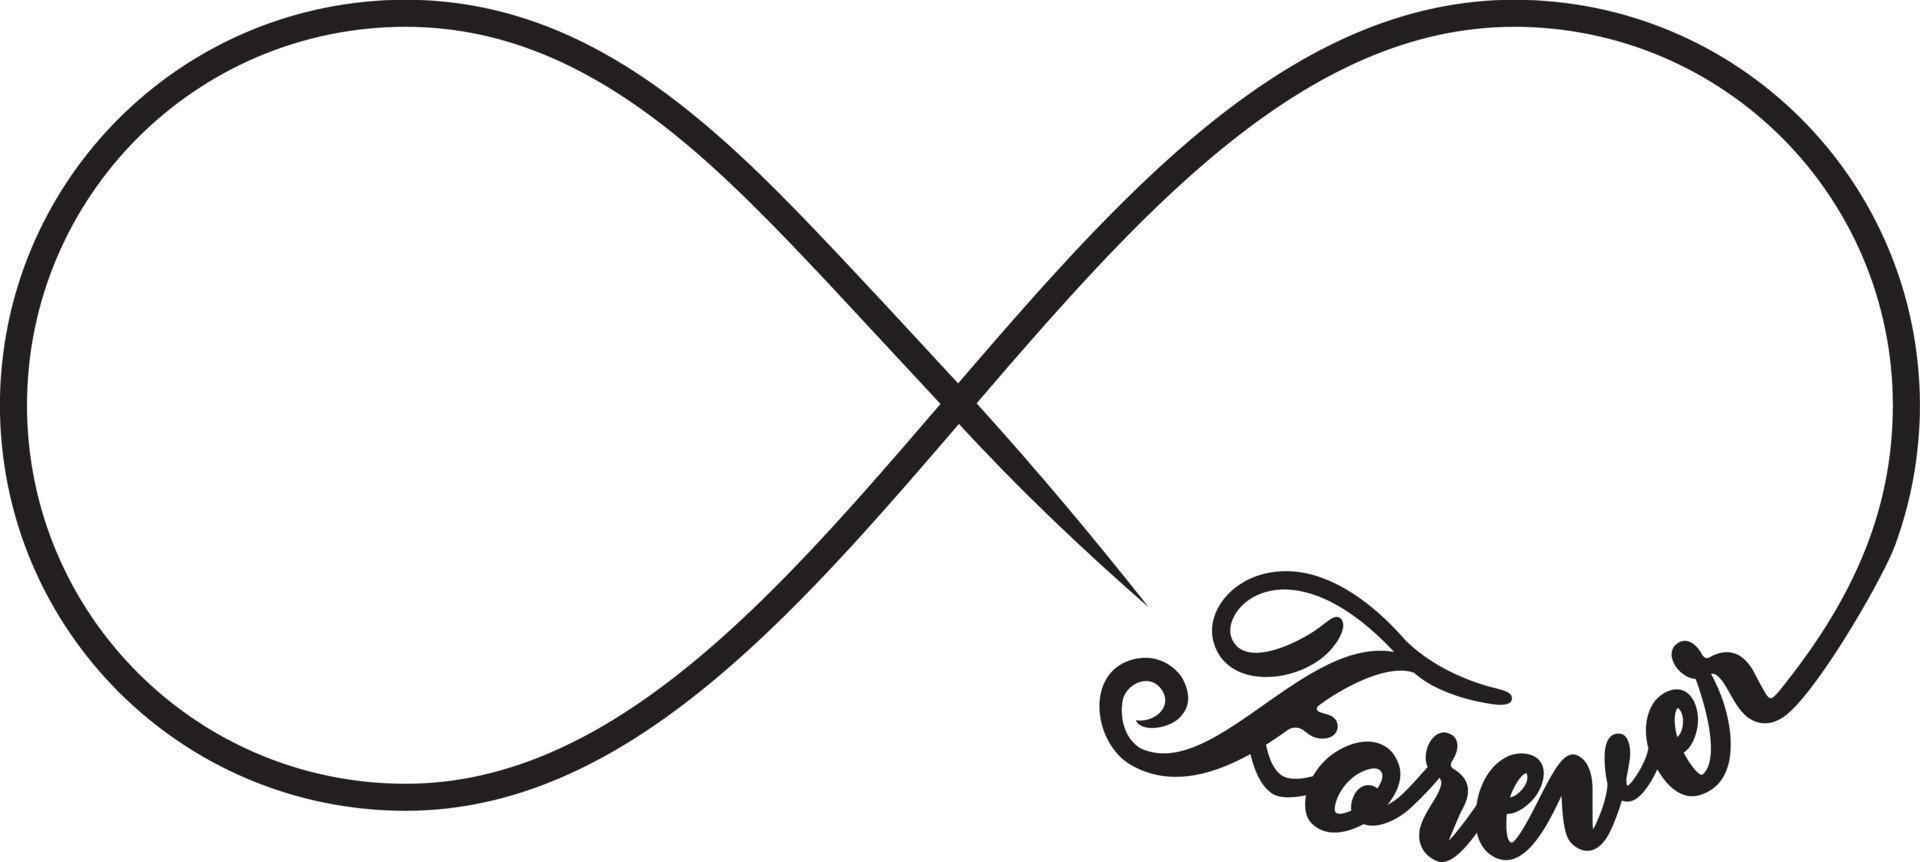 Infinity forever symbol vector